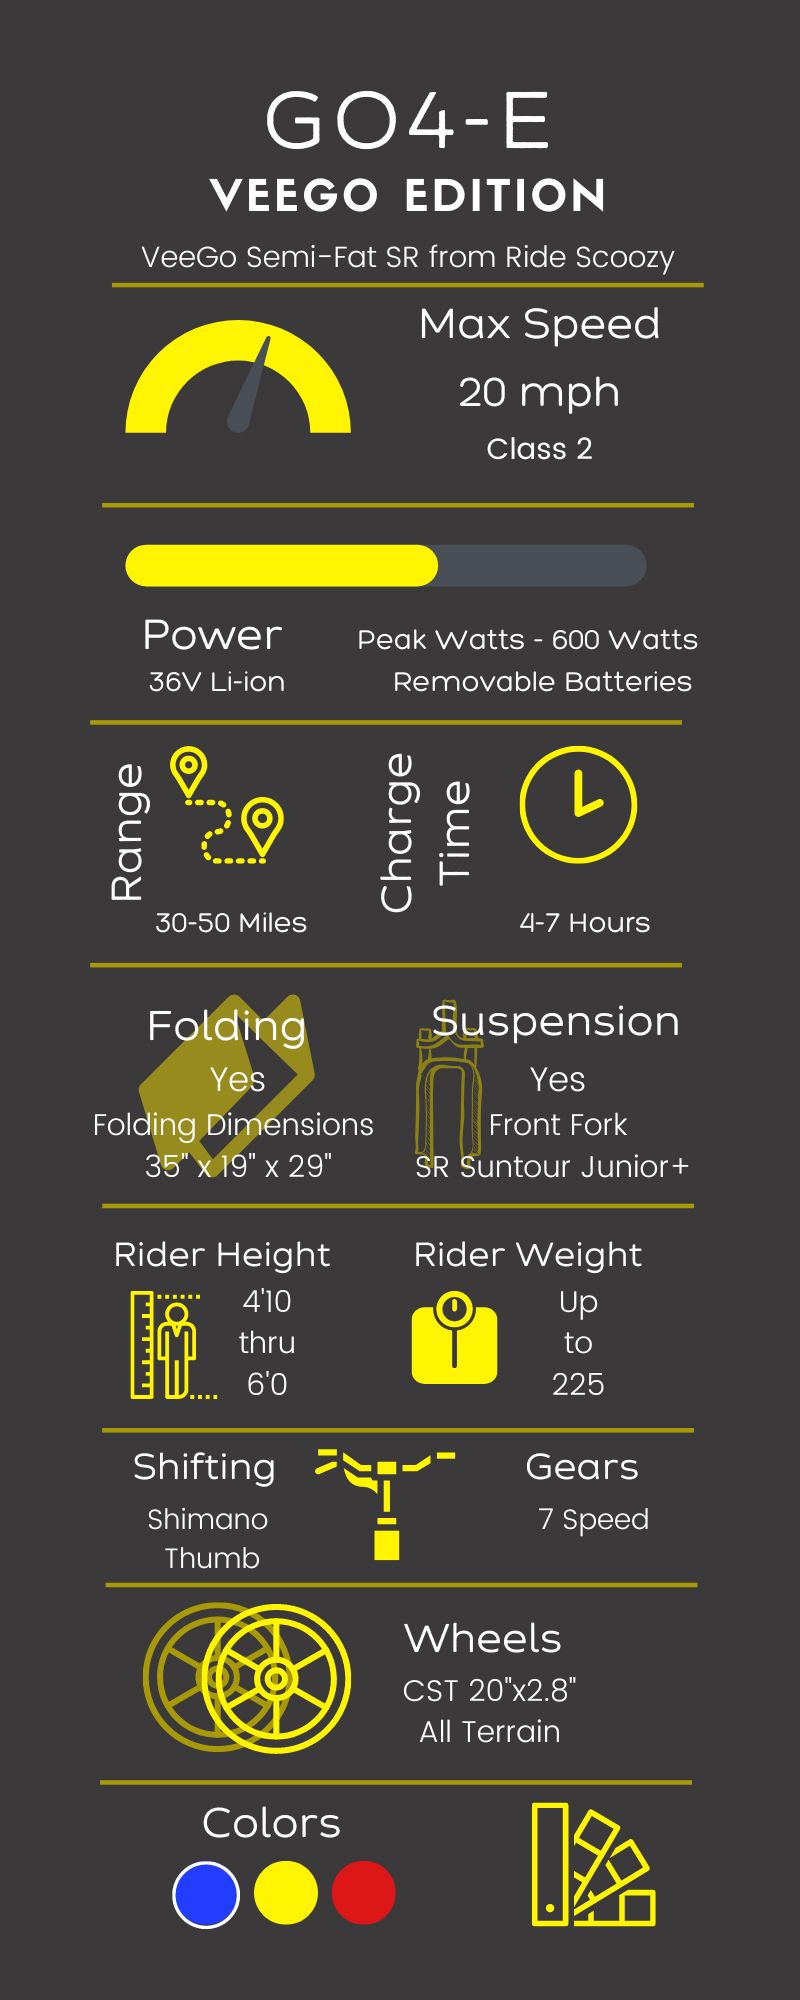 Infographic about the VeeGo Semi-Fat SR eBike from Ride Scoozy that is compatible with the Go4-E Connection Kit to create a Blackbird Bikes Sociable Tandem side-by-side quadribike. This 4 wheel bicycle offers a stable ride inclusive for all abilities and adaptive to special needs riders.